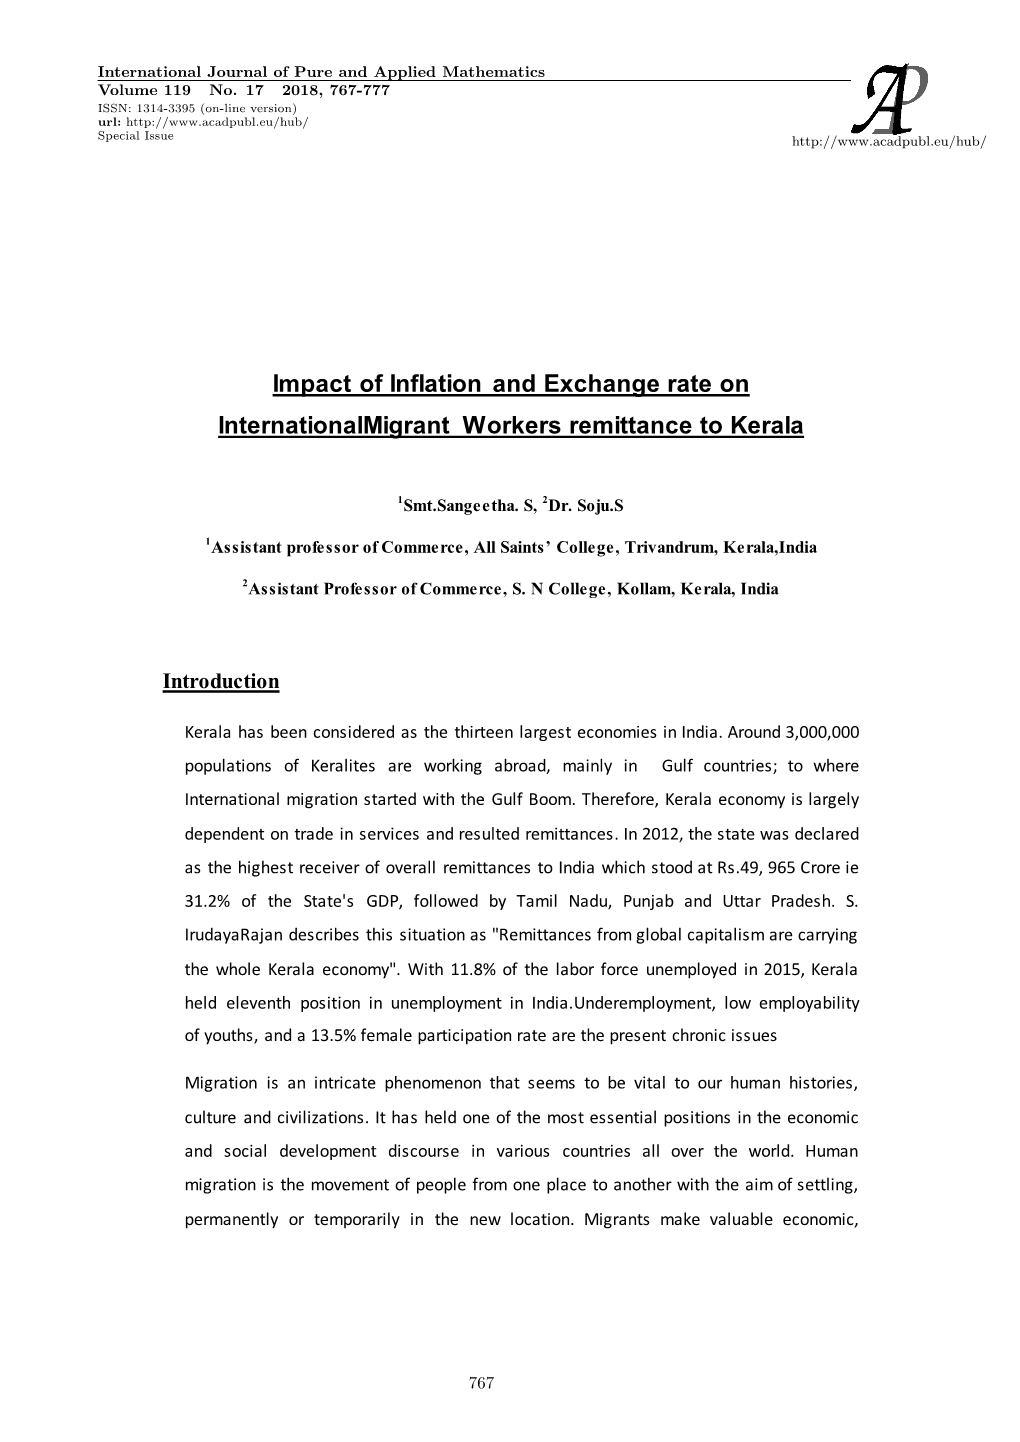 Impact of Inflation and Exchange Rate on Internationalmigrant Workers Remittance to Kerala